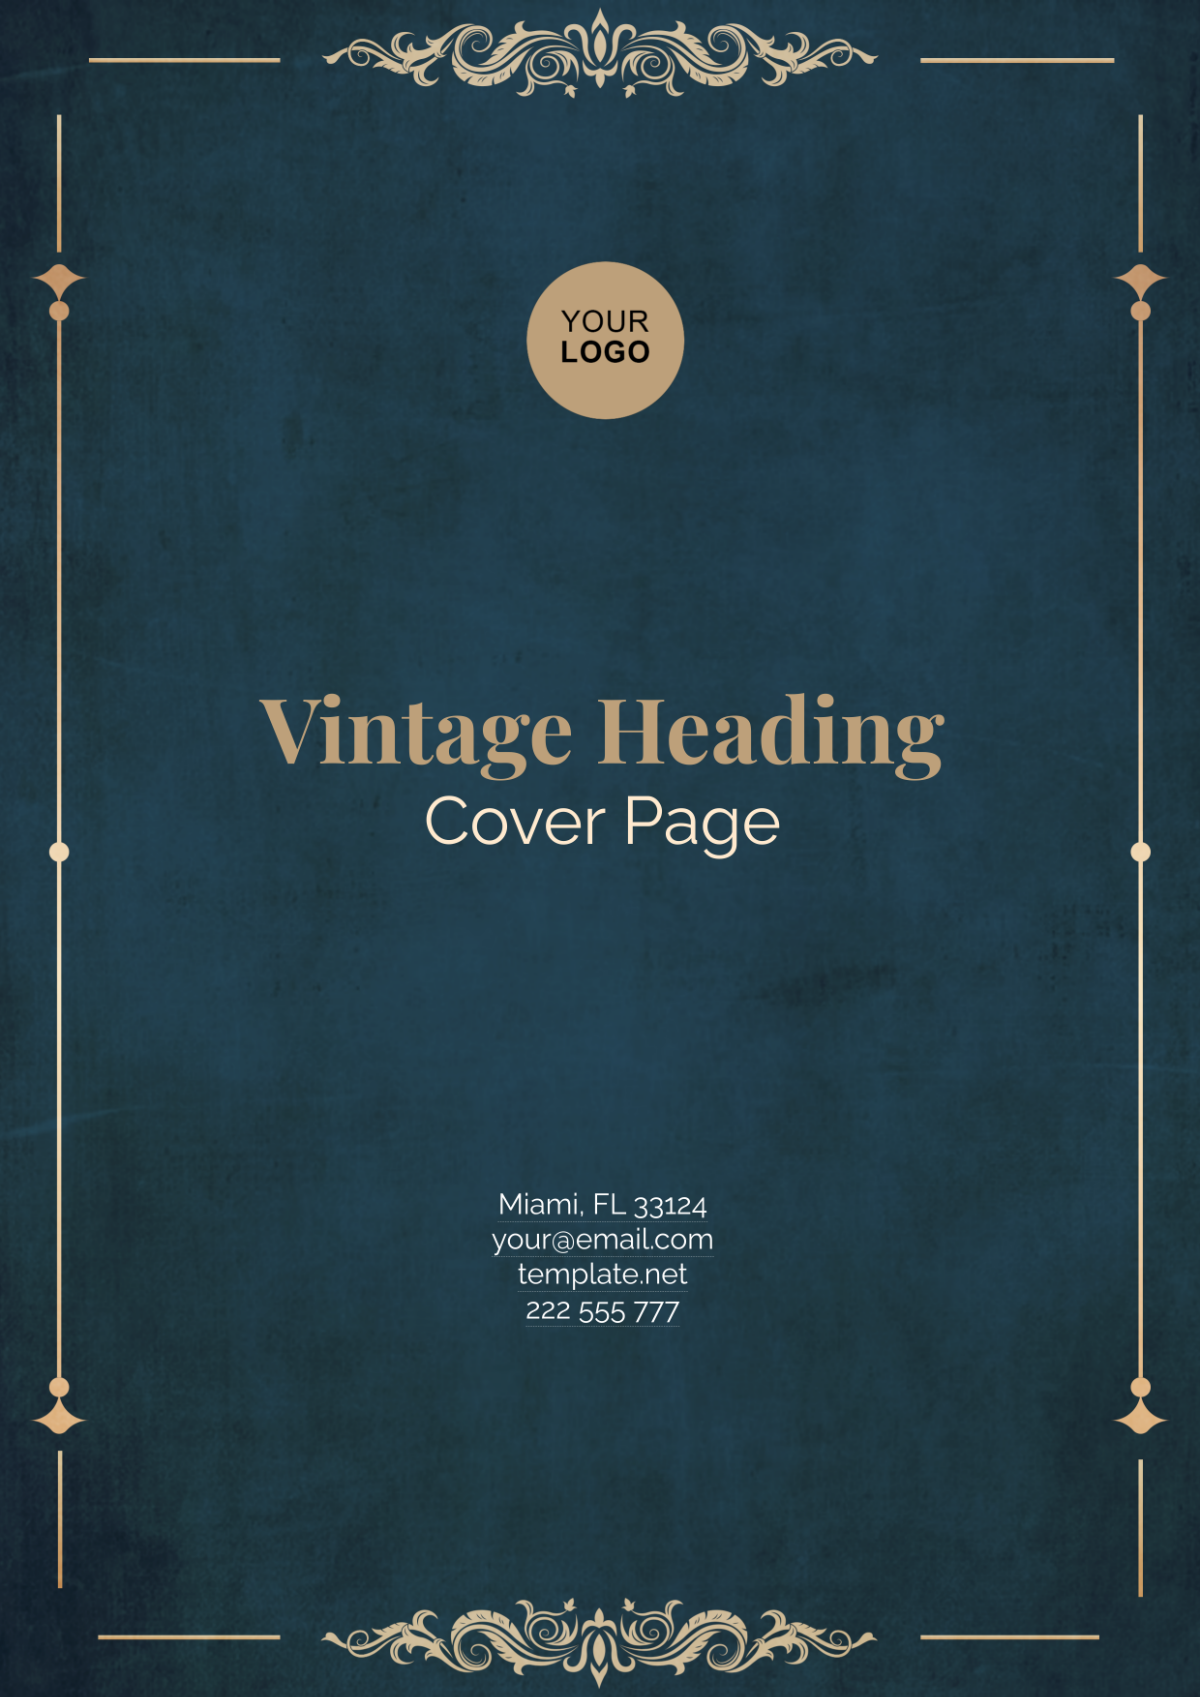 Vintage Heading Cover Page